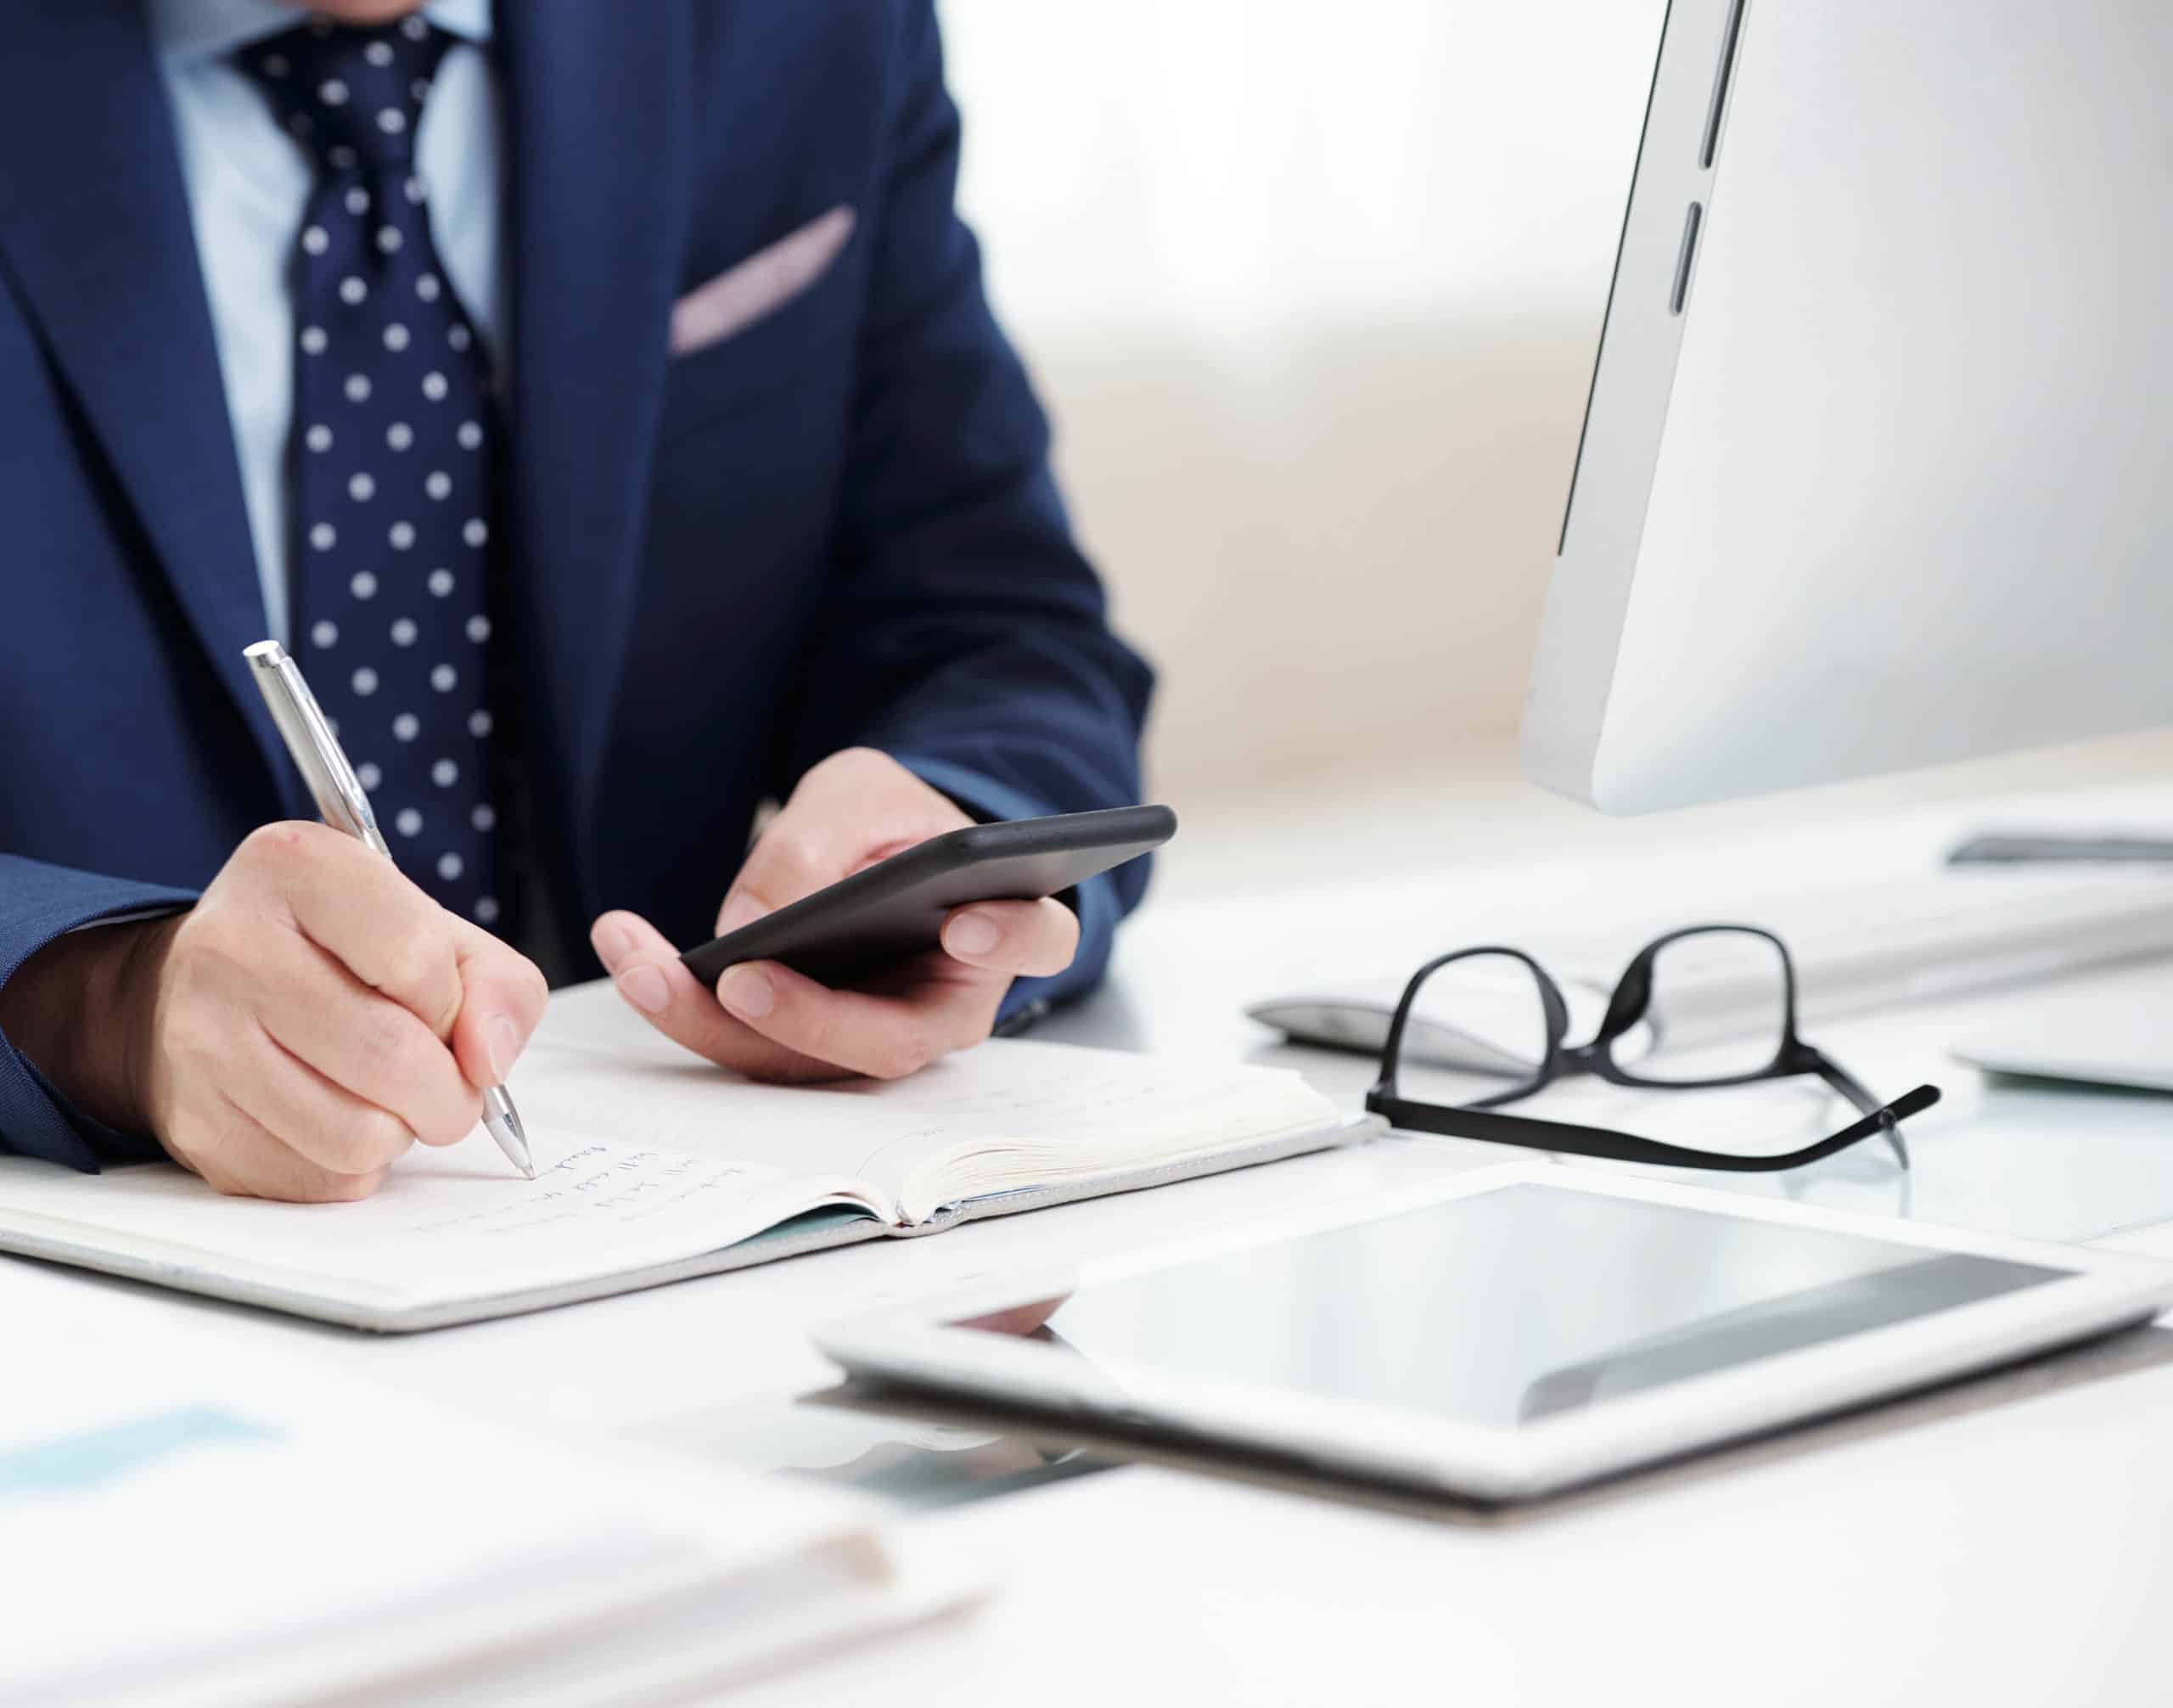 Cropped image of businessman checking messages in smartphone and taking notes in planner